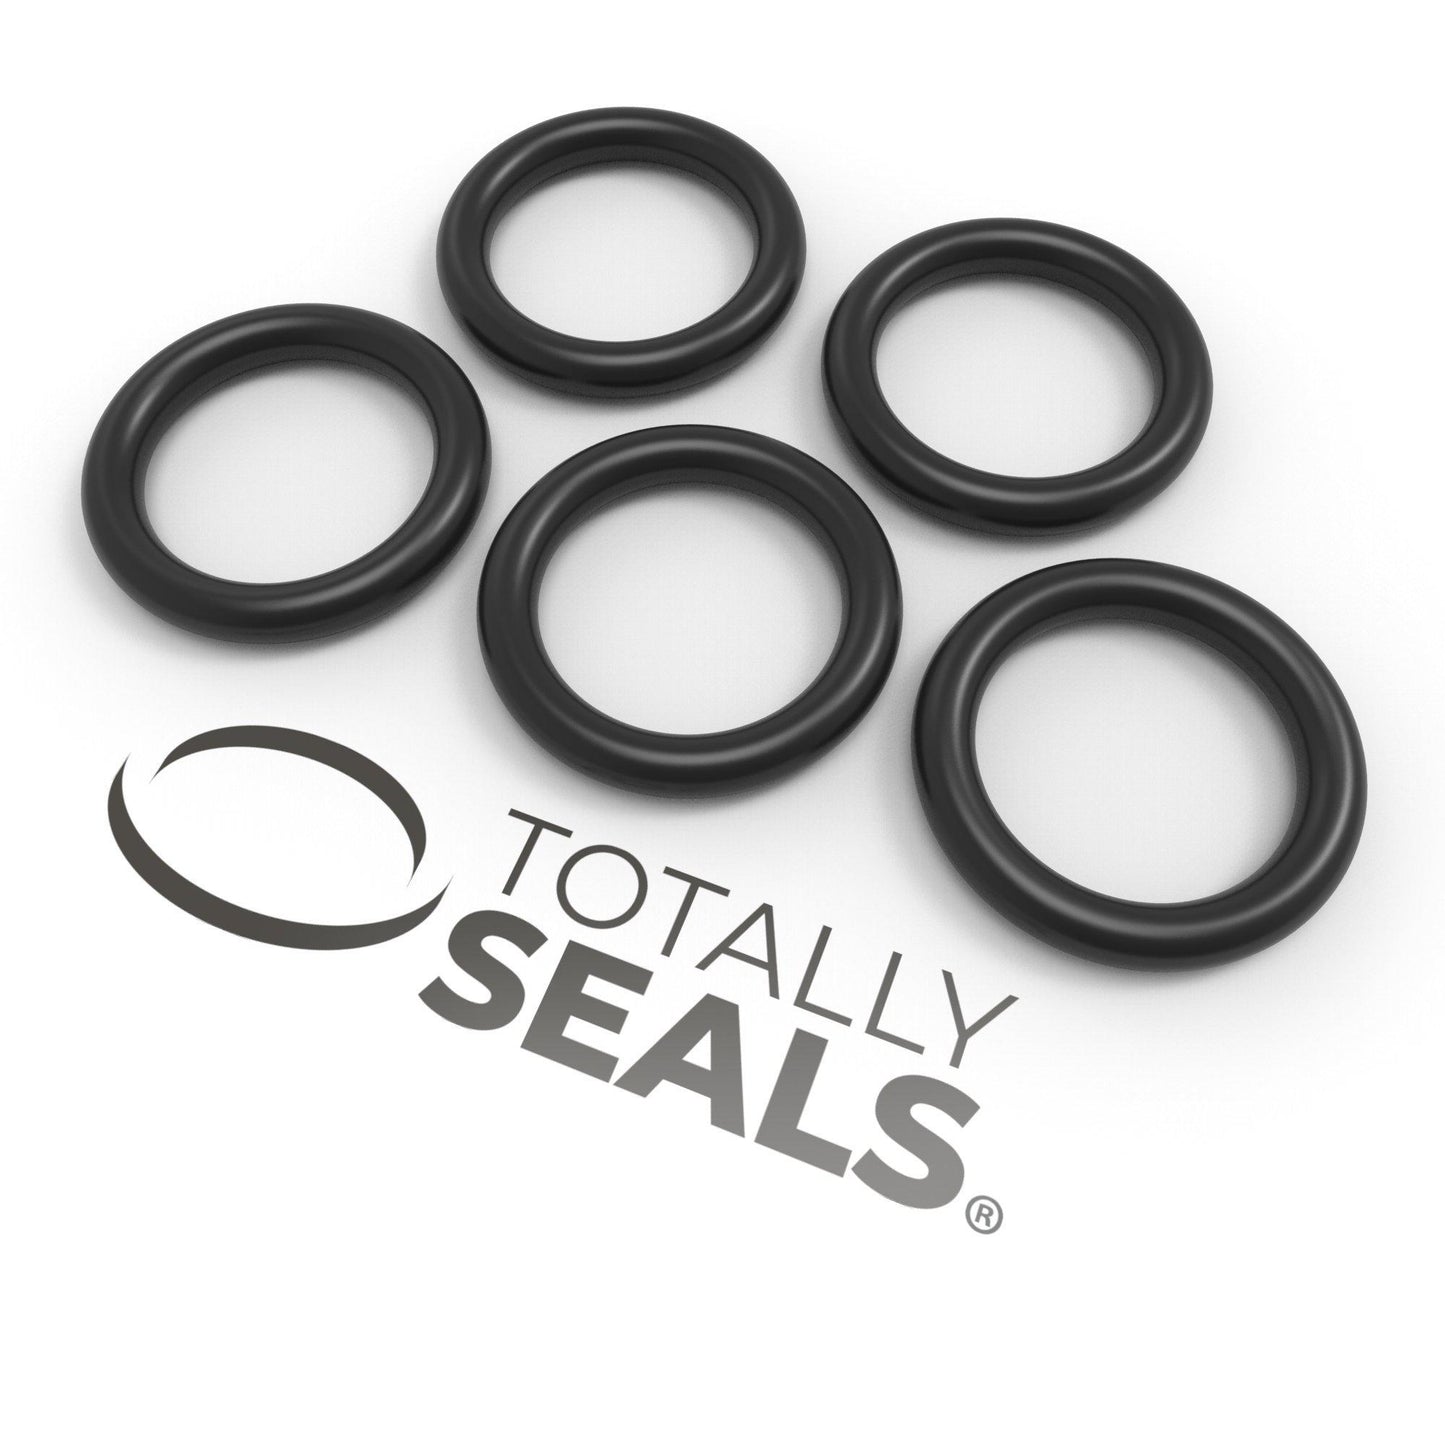 30mm x 1.5mm (33mm OD) Nitrile O-Rings - Totally Seals®